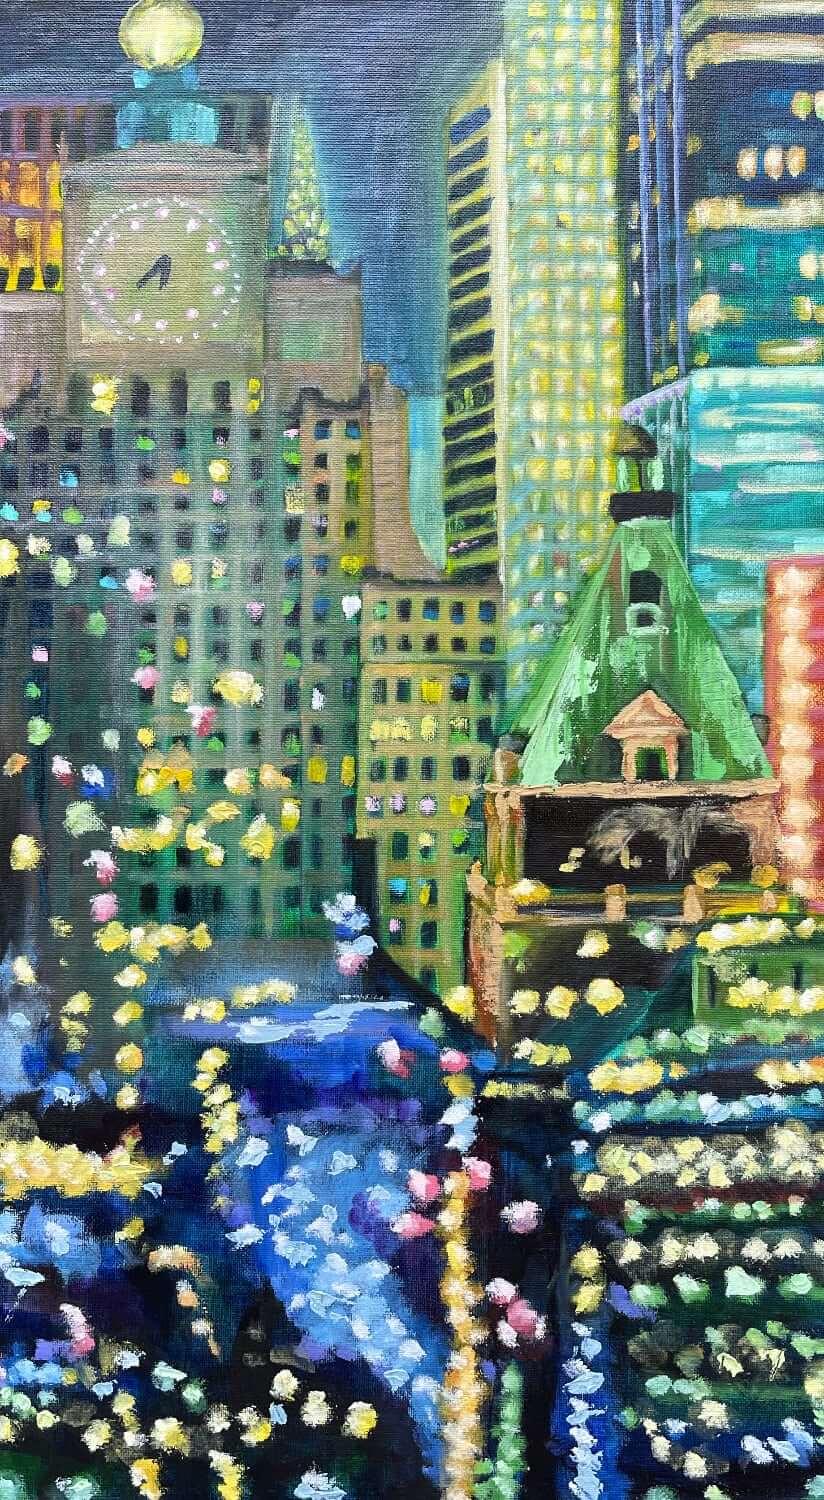 Original Oil Painting of New York City at Night, Yellow, Blue & Green, 12" x 24" Painting on Canvas Panel